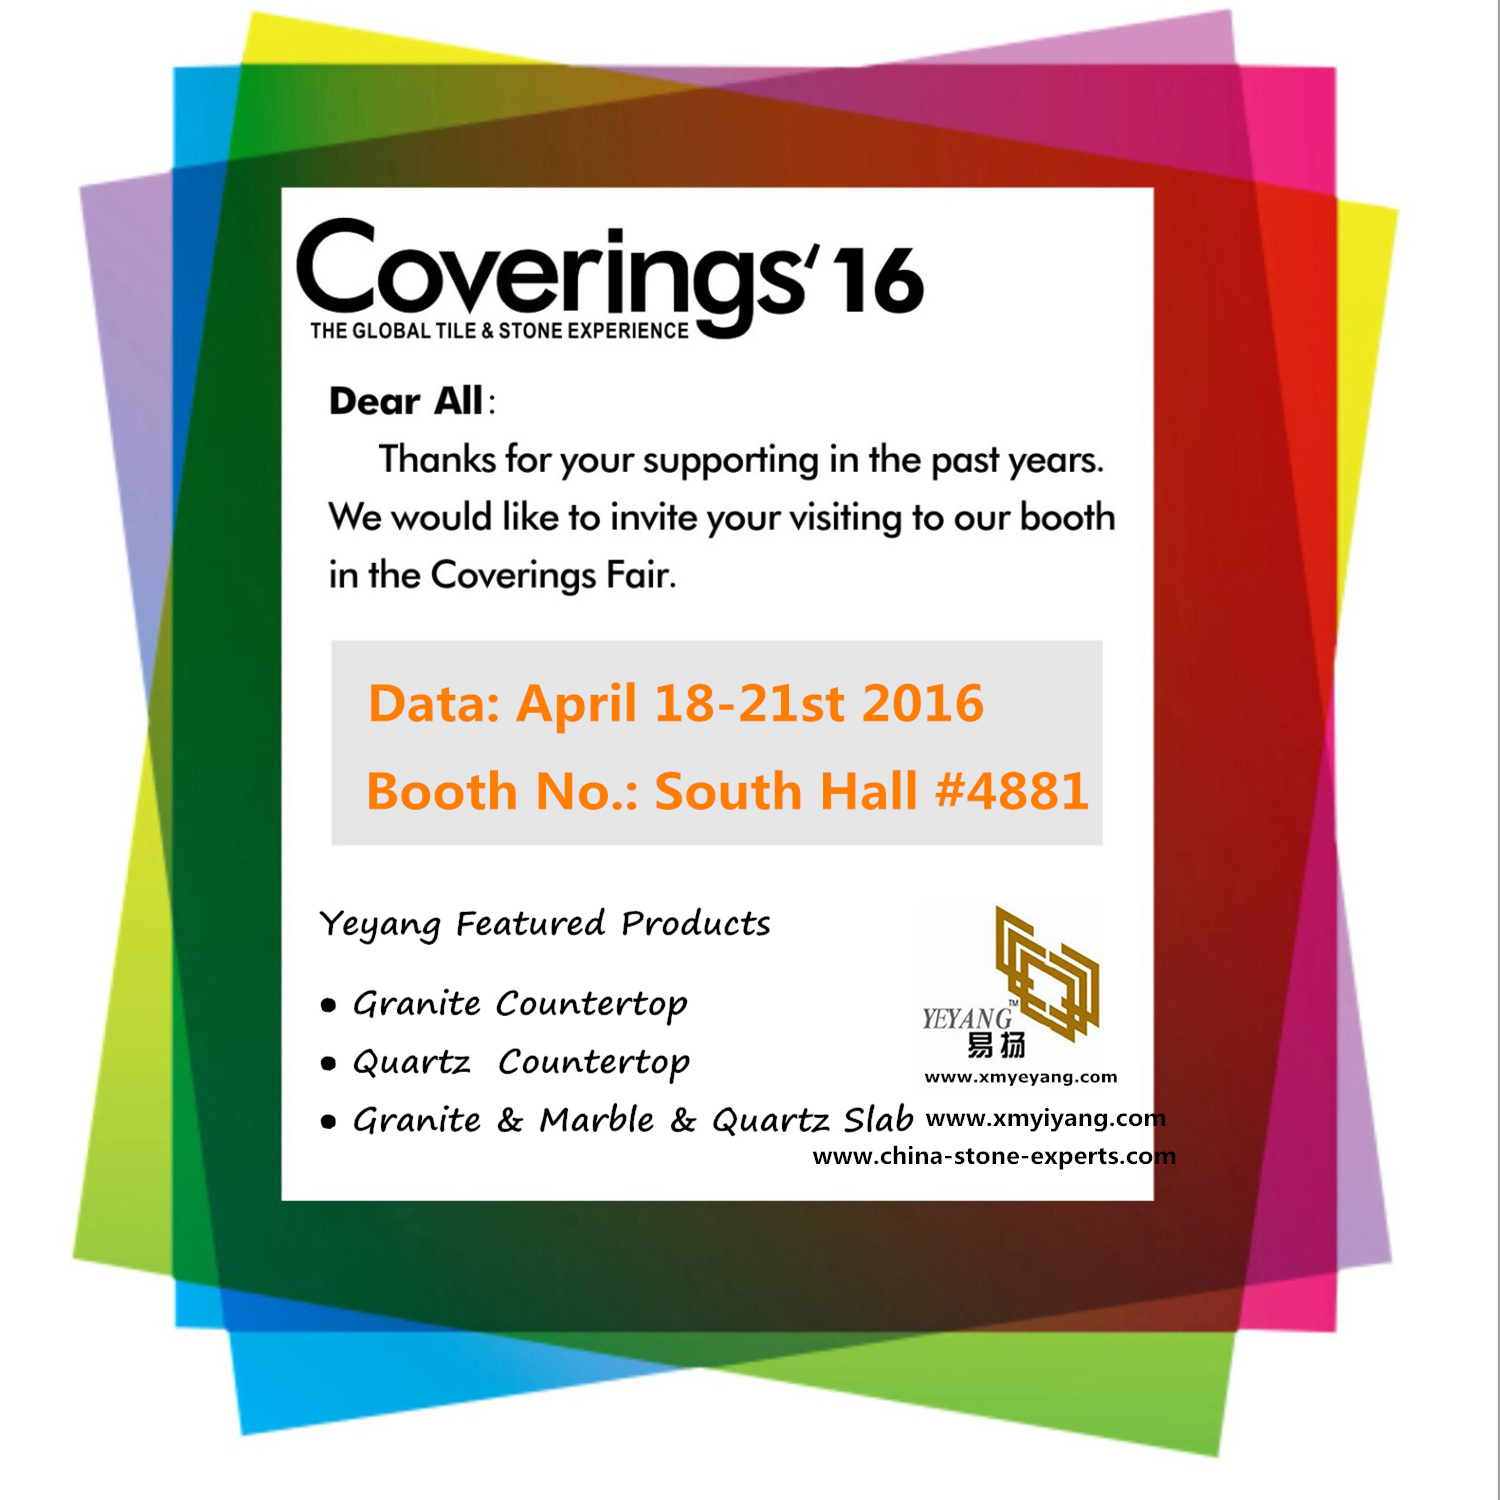 coverings_2016 from yeyang stone